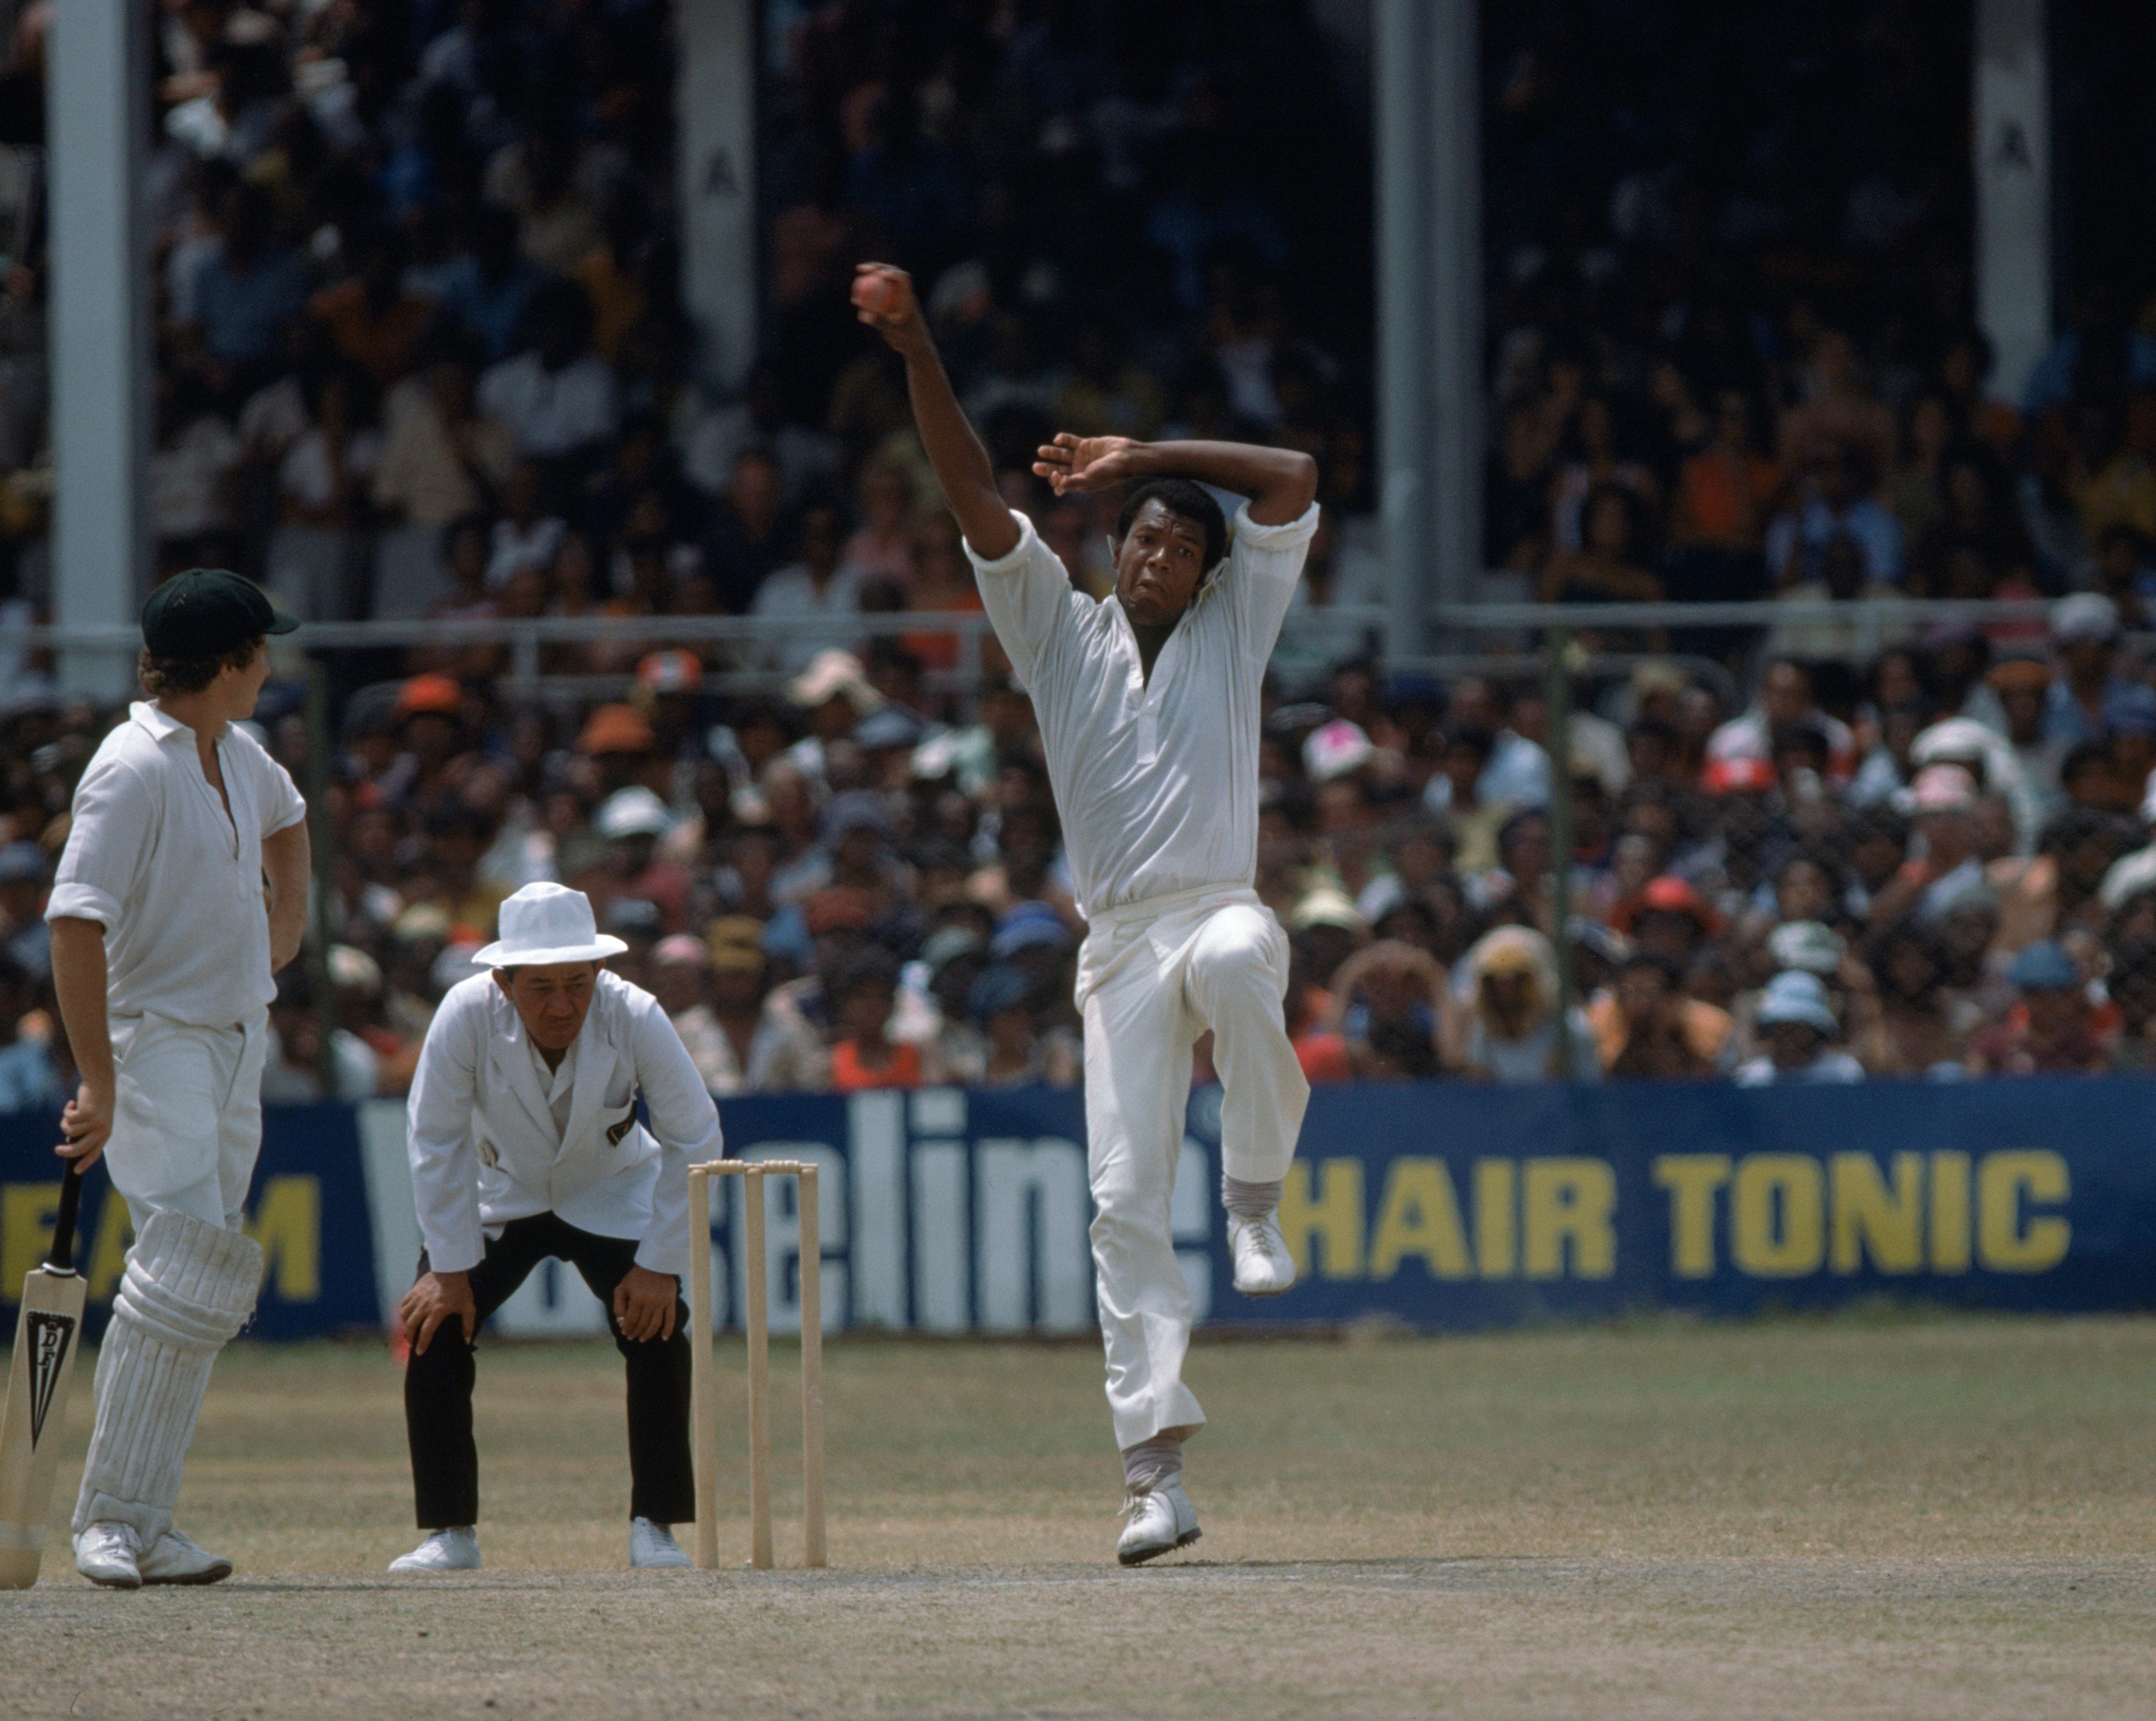 ICC on X: "One of the Windies pace-bowling heroes, he took 125 wickets in 27 Tests at 23.30, with 8/29 his best, against Pakistan in 1977. Happy birthday, Colin Croft! https://t.co/7HRCYfF50P" / X